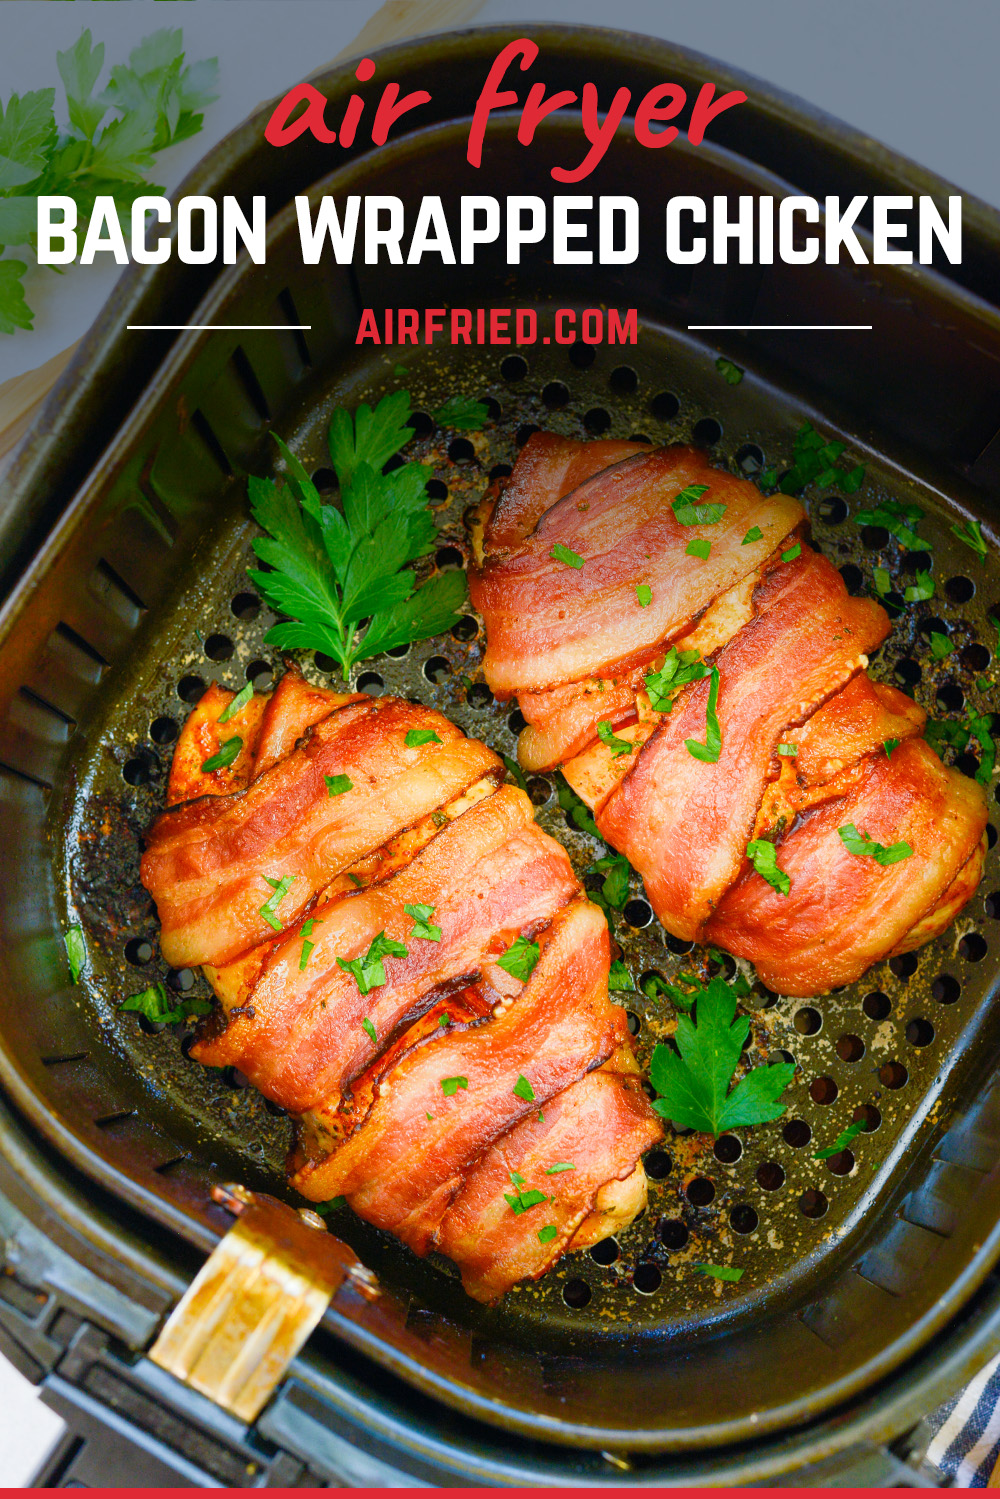 Two bacon wrapped chicken breasts garnished in an air fryer basket.